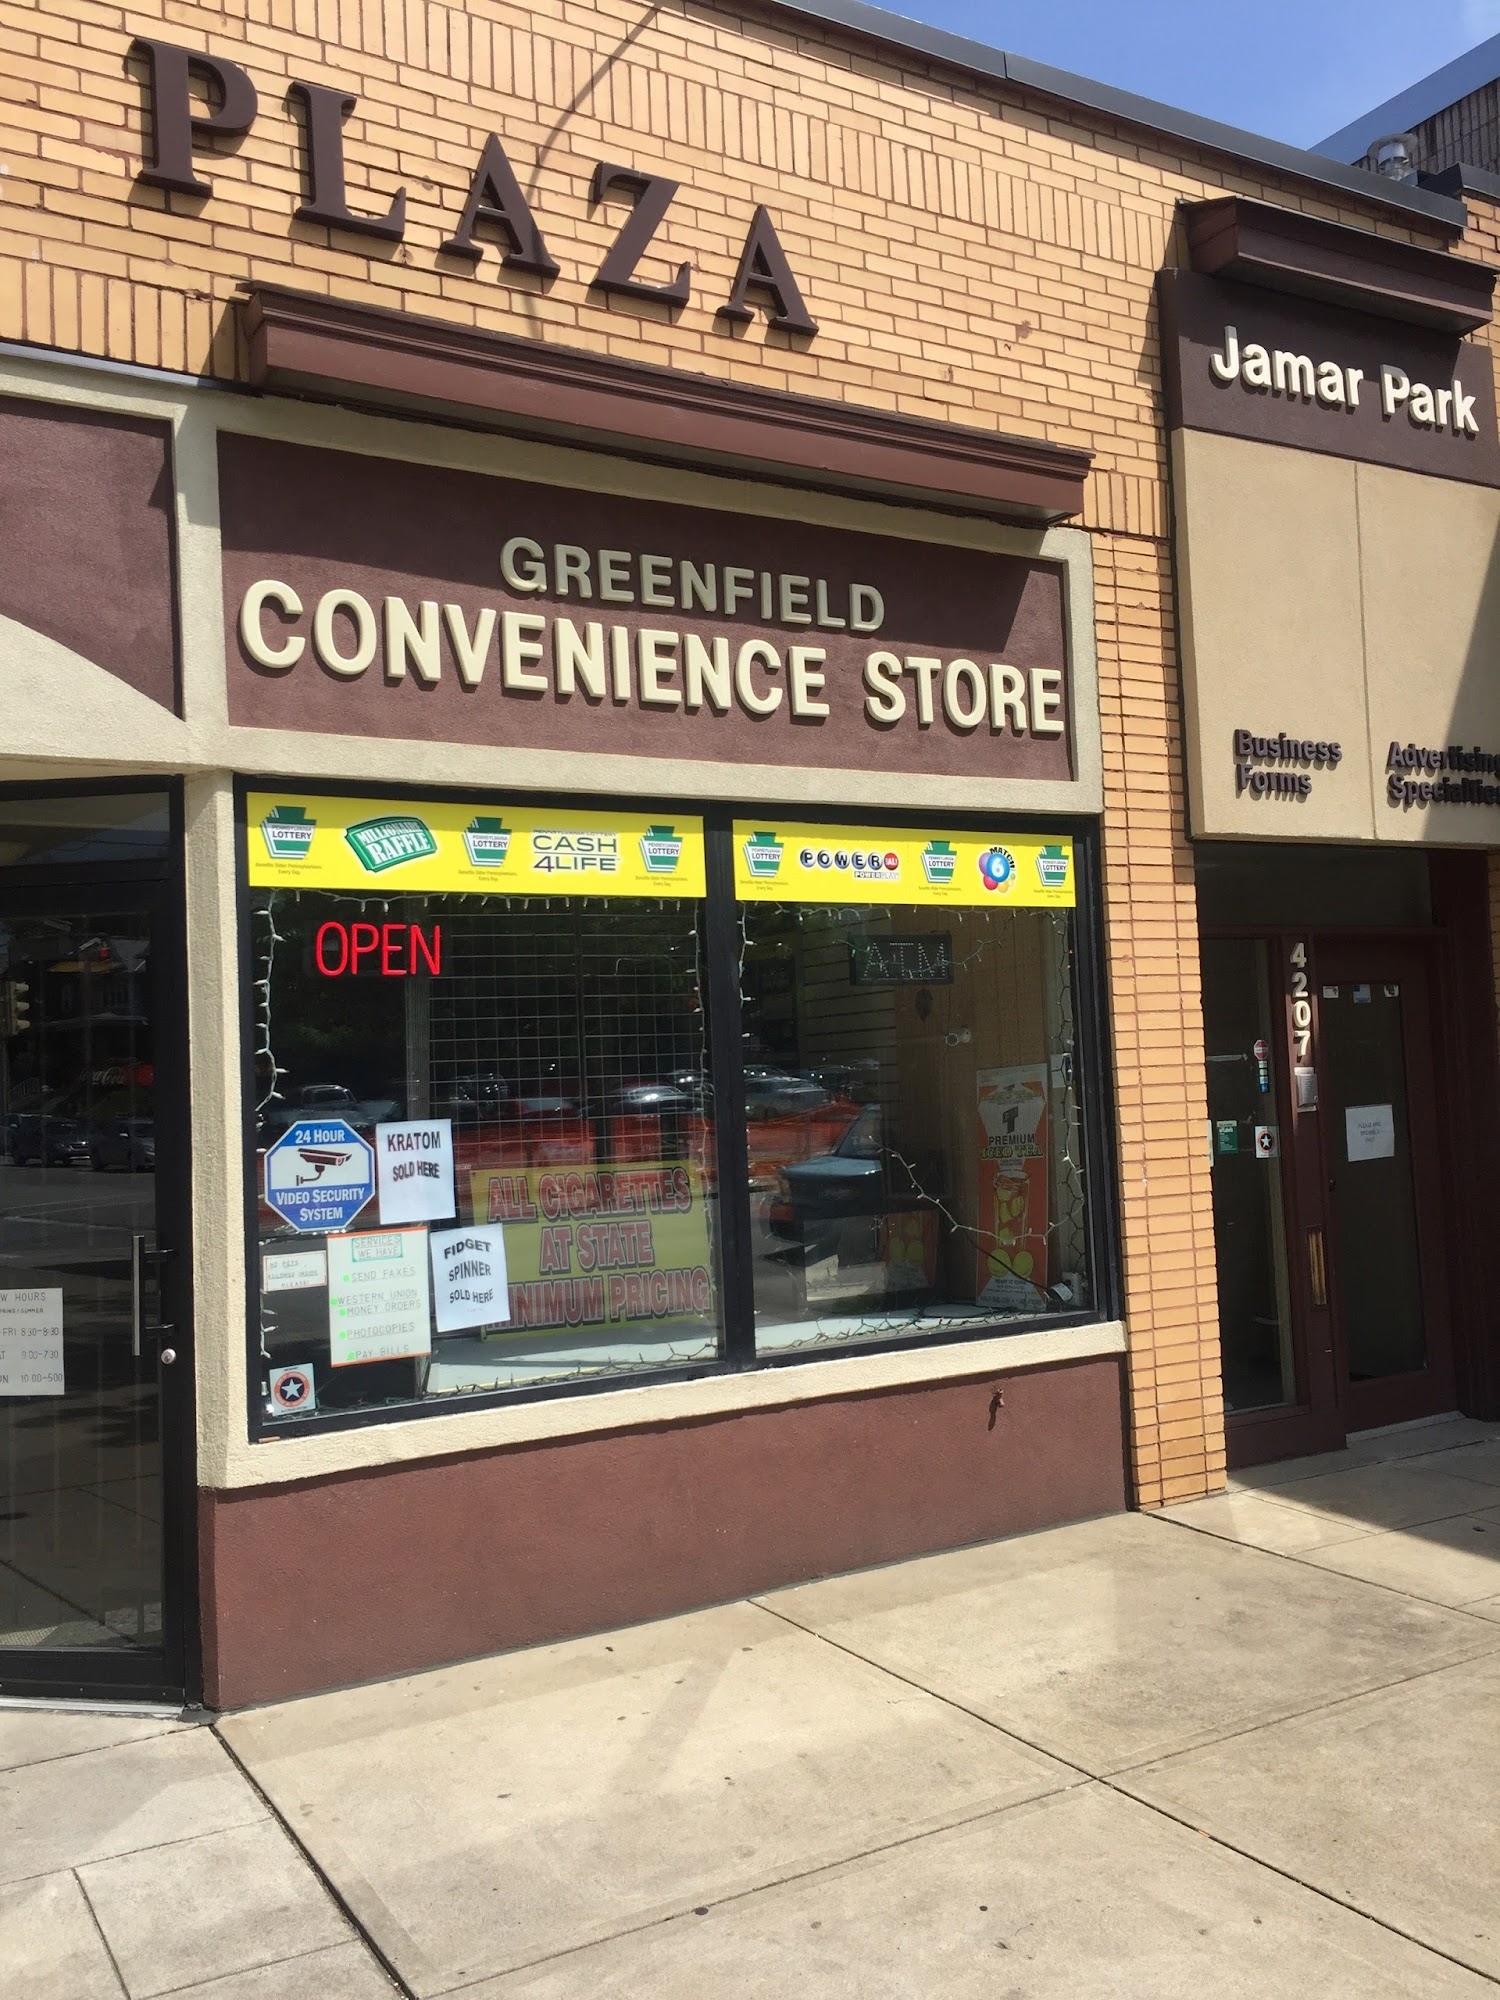 Greenfield Convenience Store